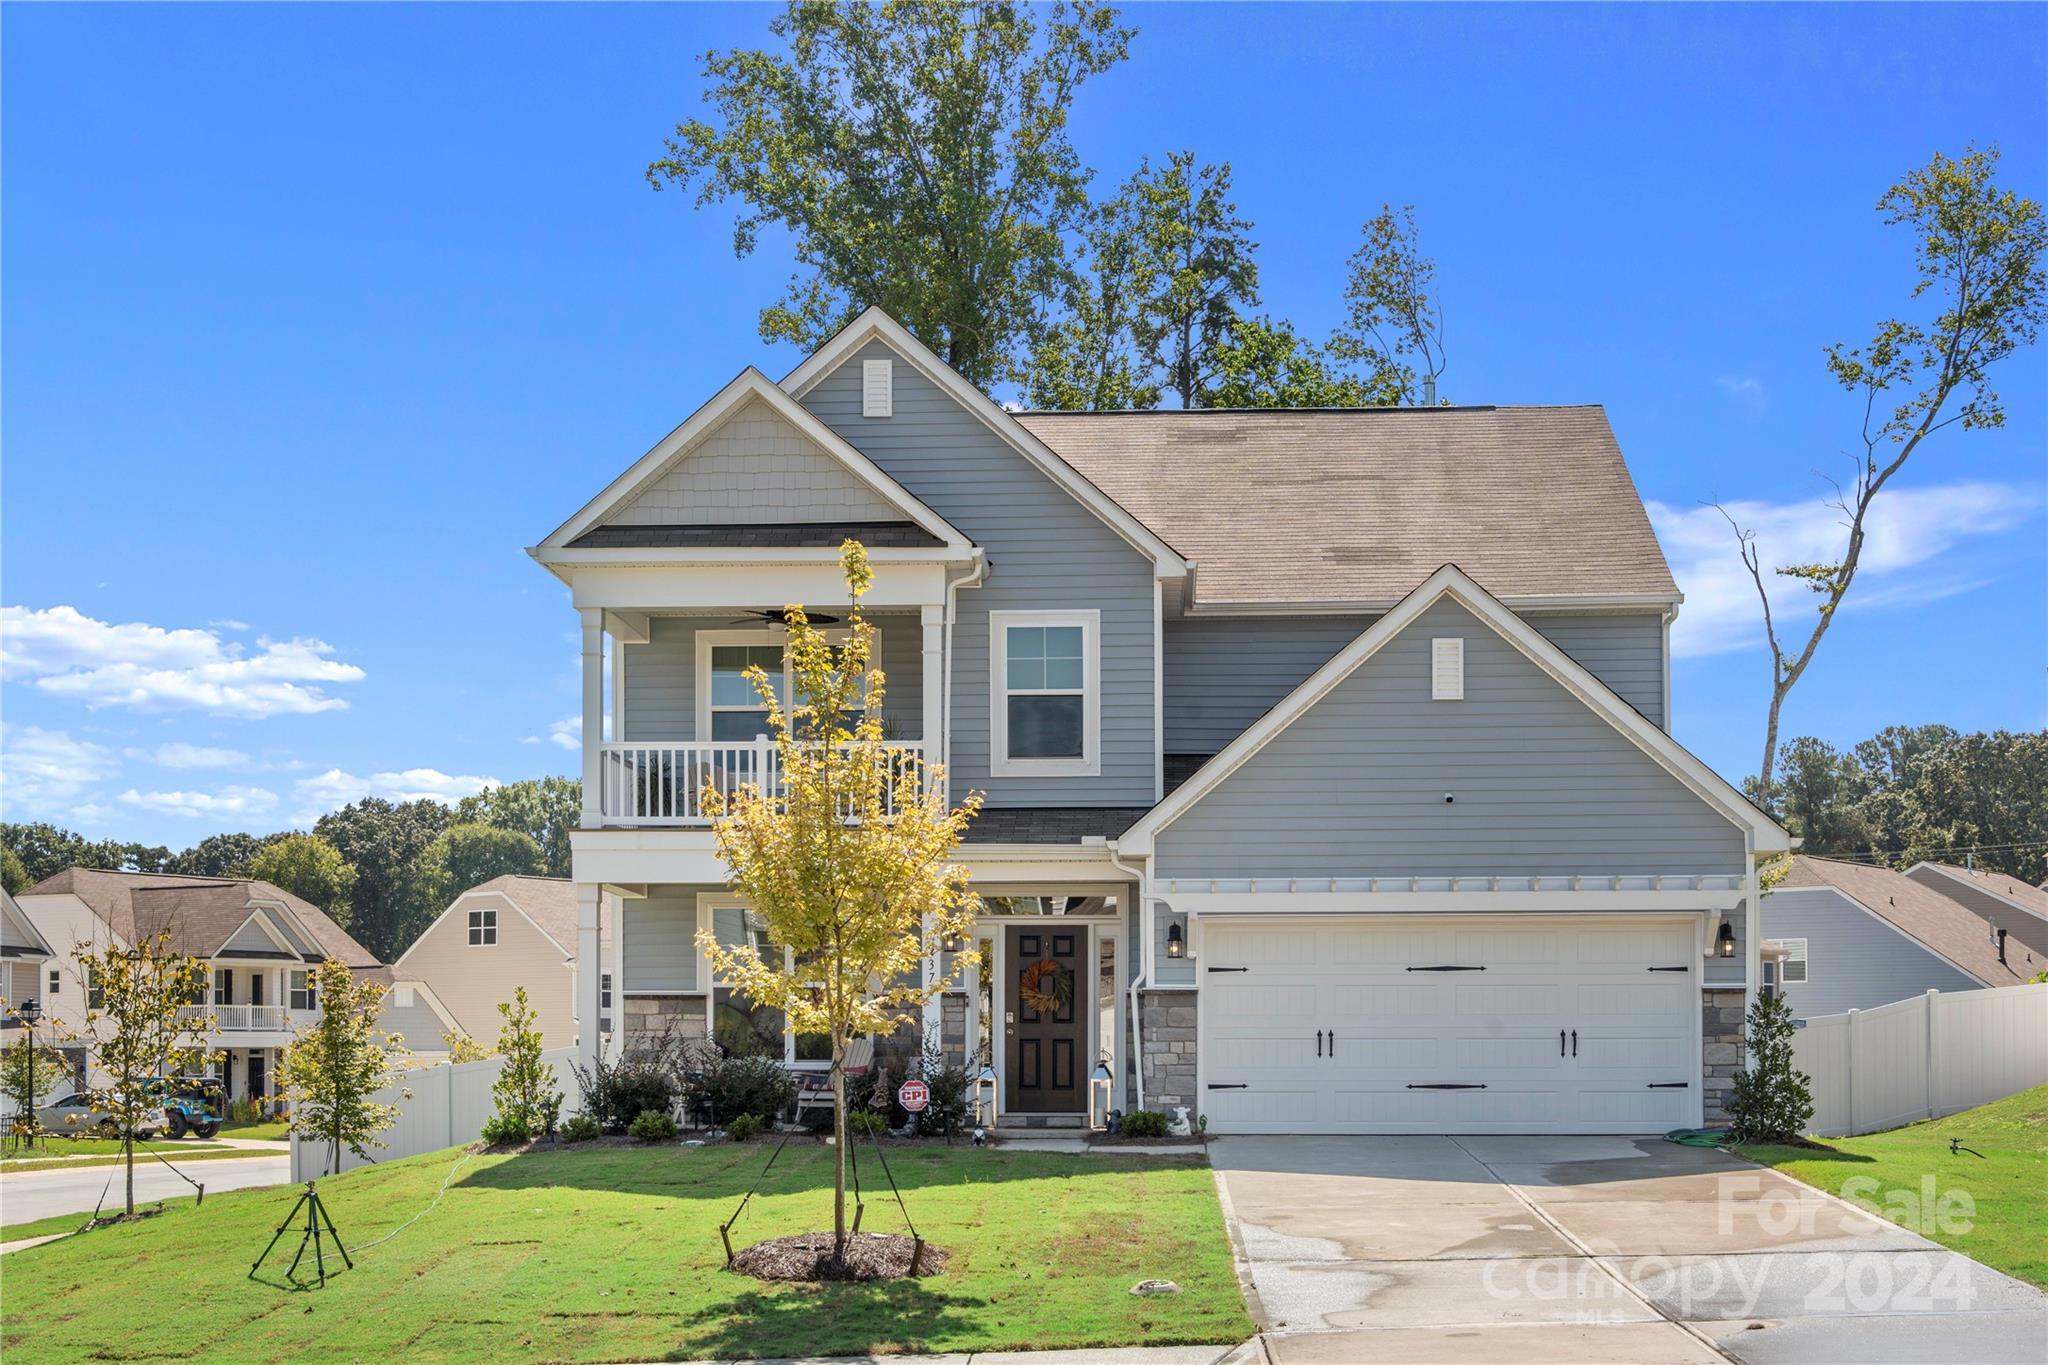 Photo one of 2374 Windley Dr Gastonia NC 28054 | MLS 4128036